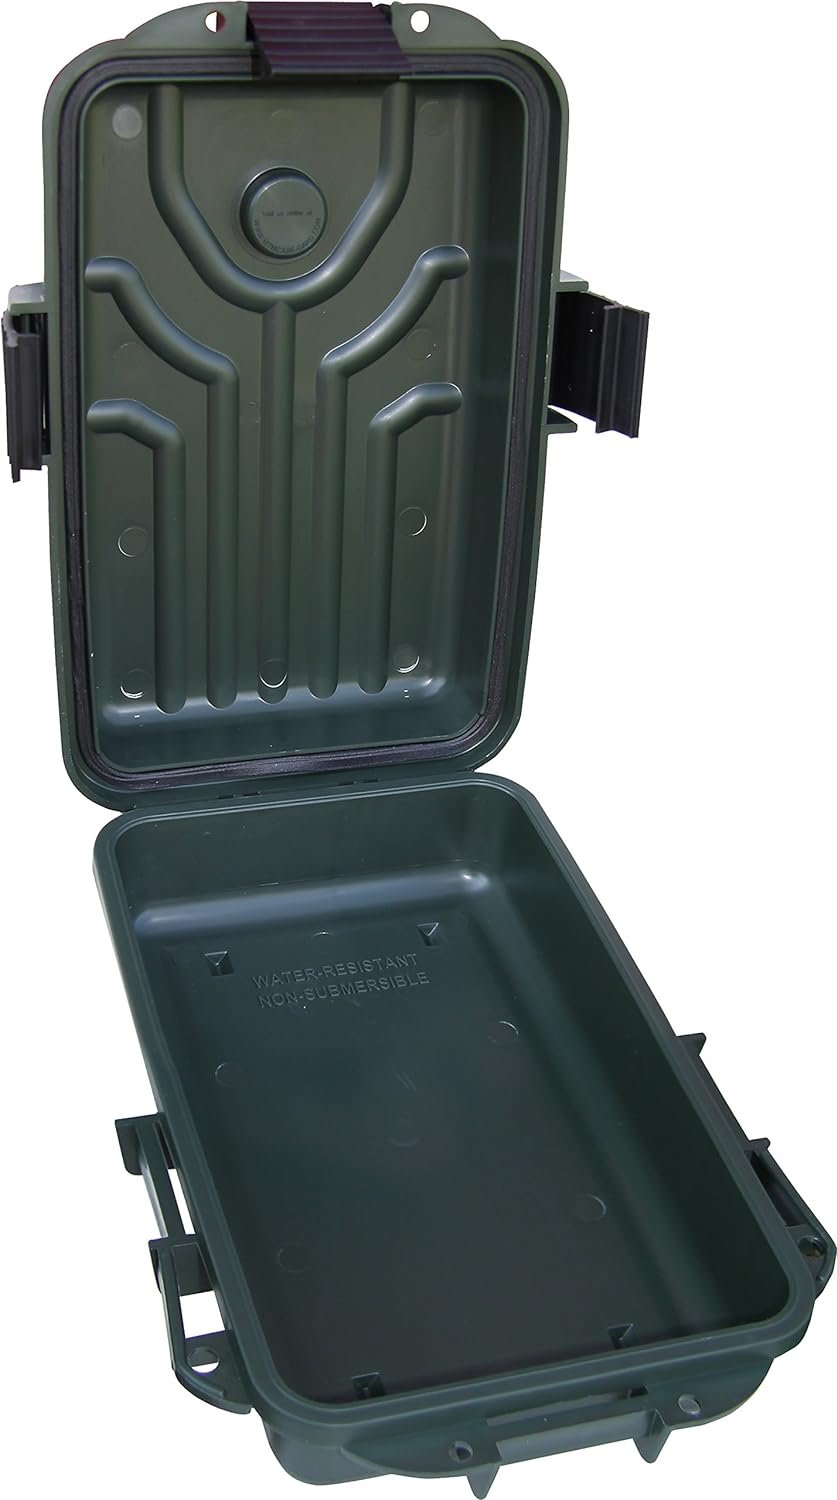 MTM Survivor Dry Box with O-Ring Seal Review